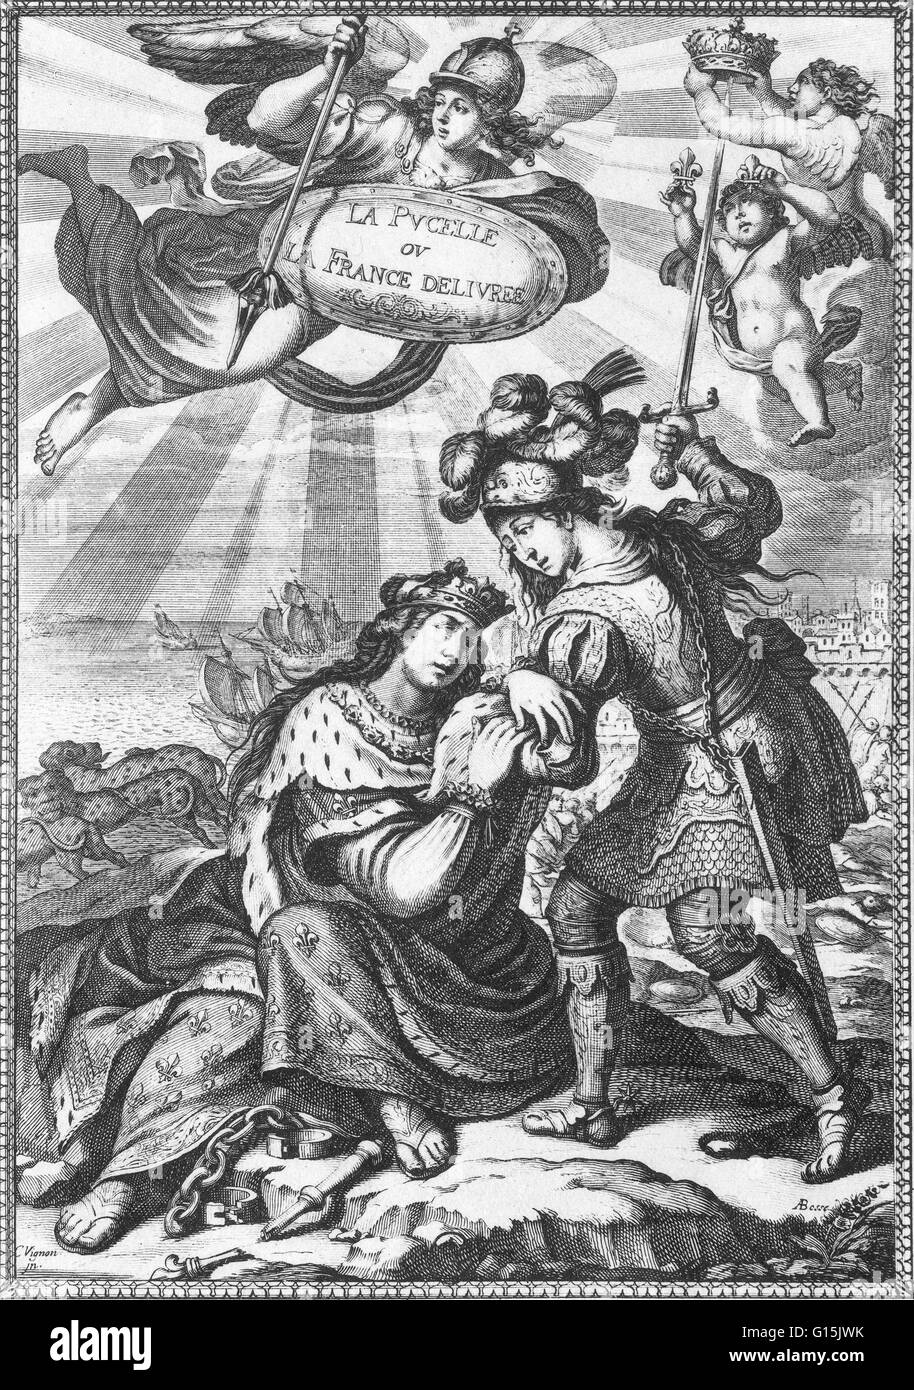 Title page of the poem. "Joan raises up a fallen France". Joan of Arc (January 6, 1412 - May 30, 1431) national heroine of France and a Roman Catholic saint. A peasant girl born in eastern France who claimed divine guidance, she led the French army to sev Stock Photo